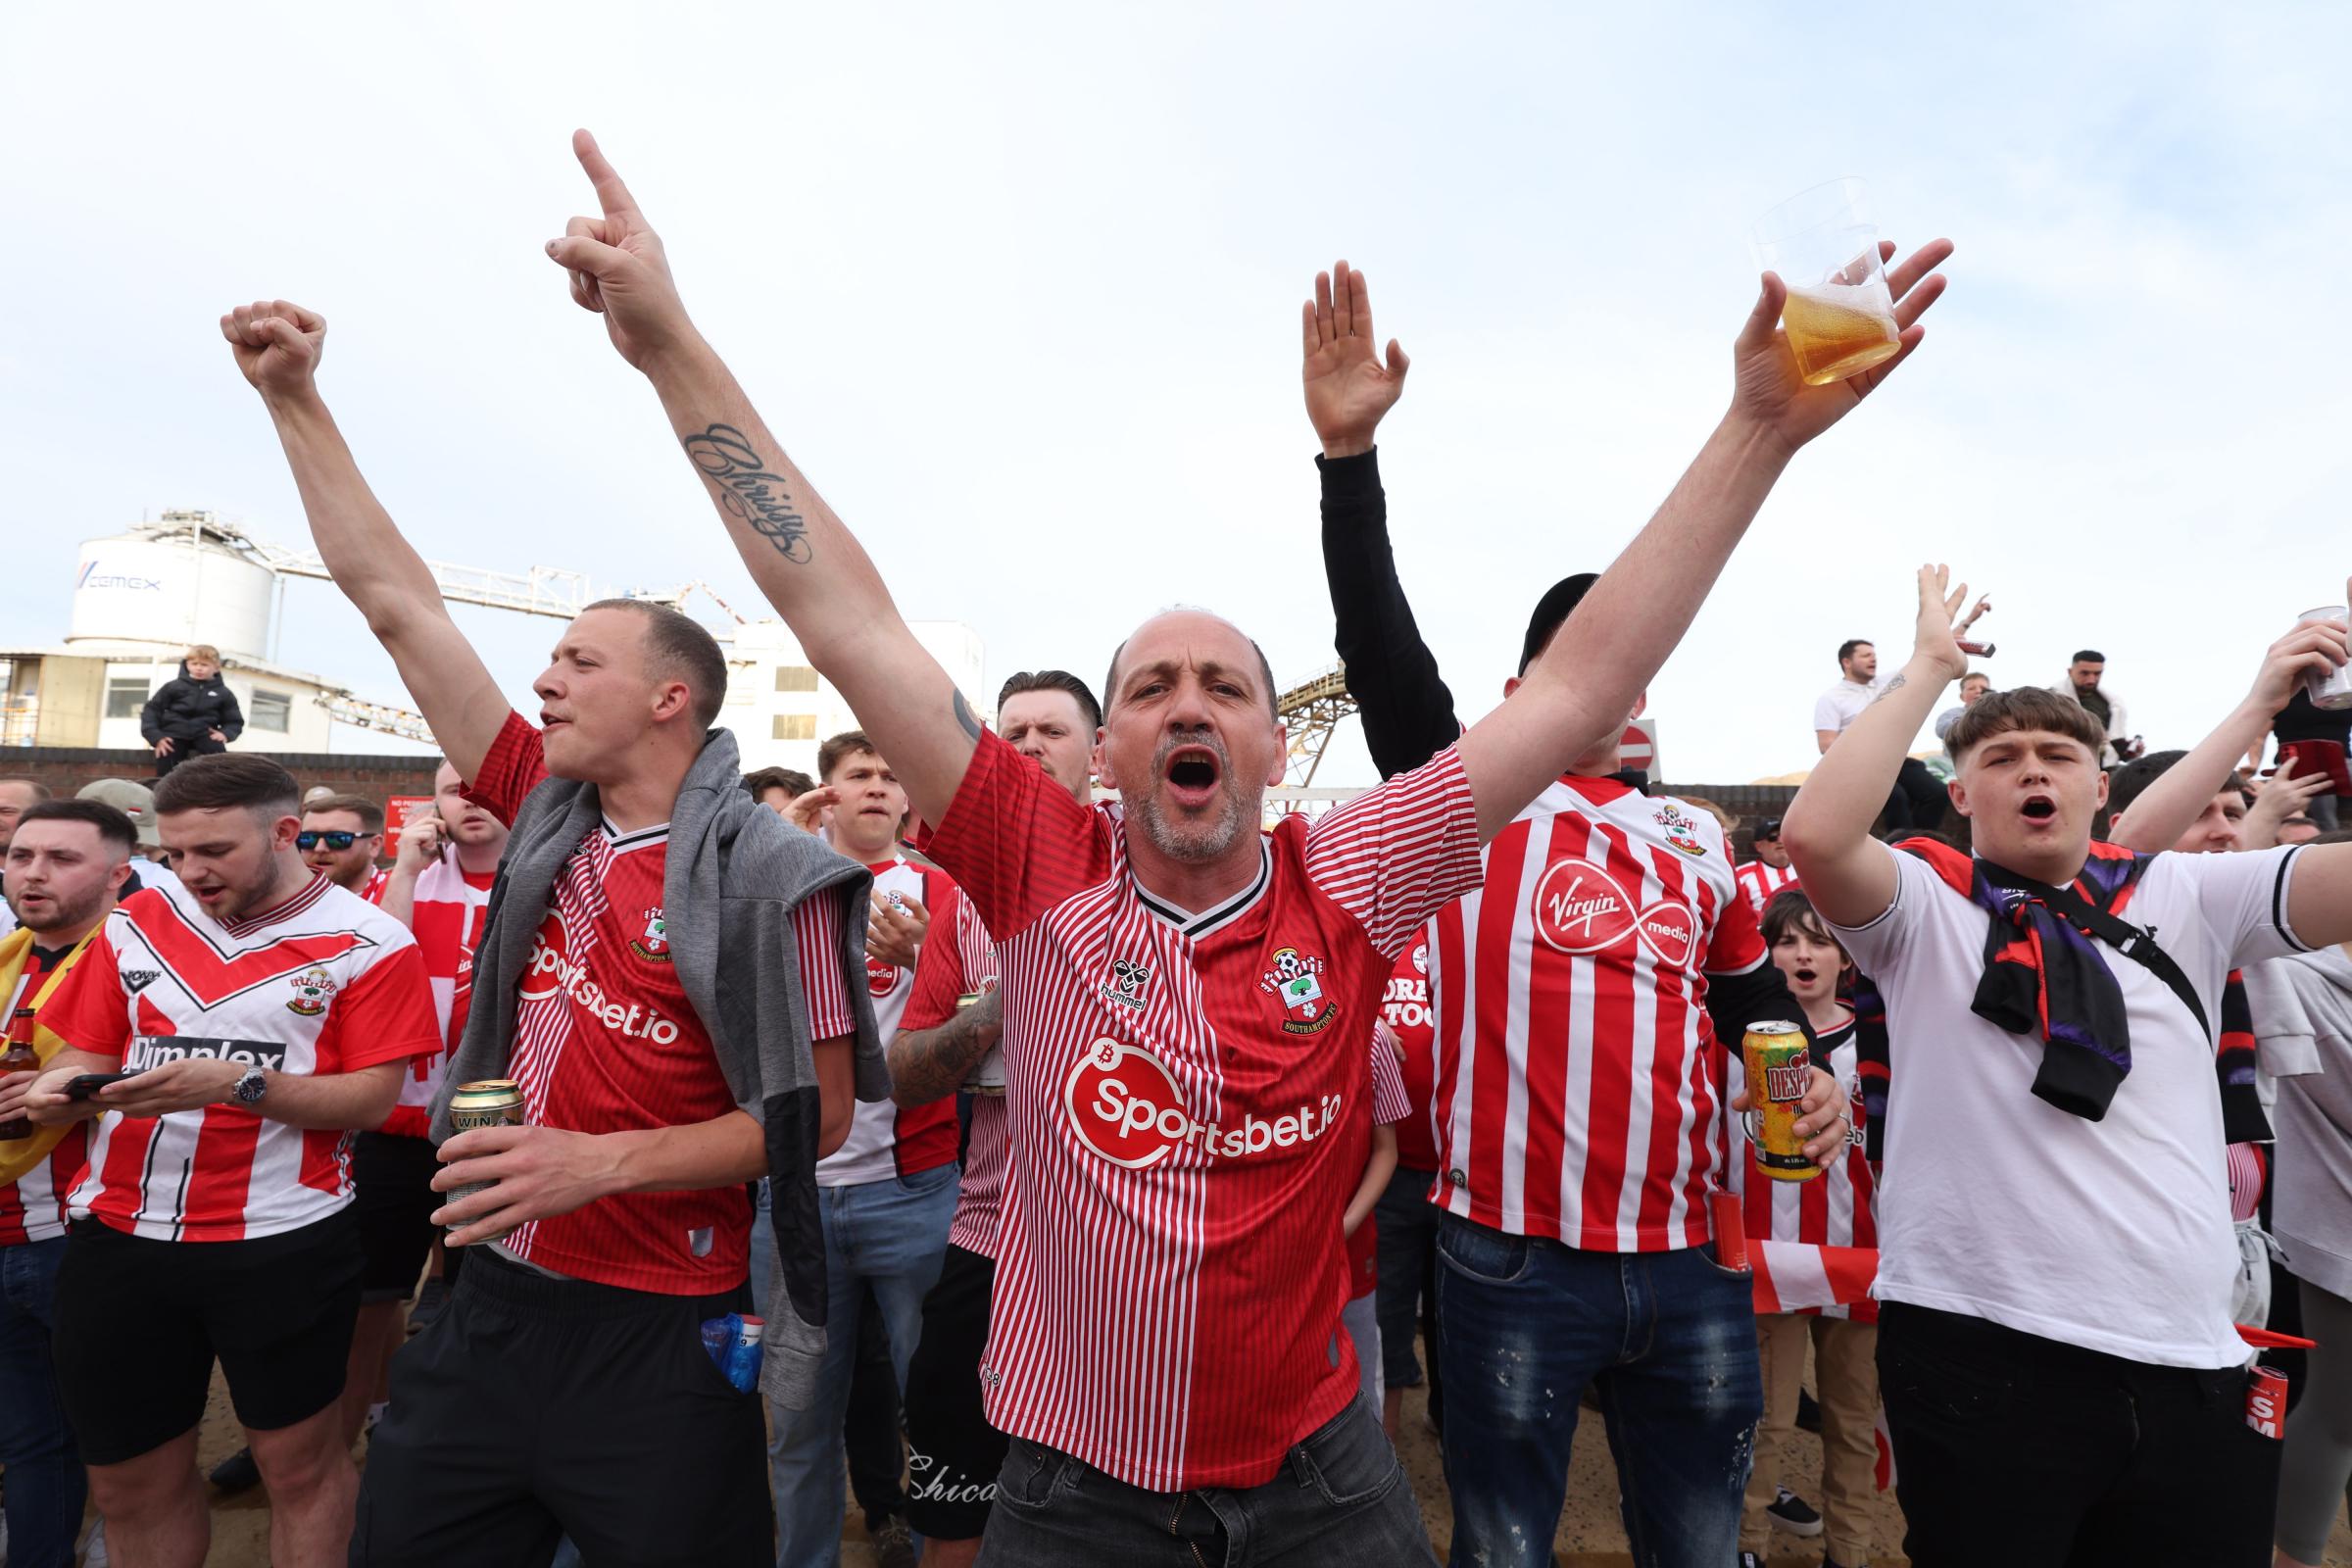 Saints fan in Belgium makes appeal before Championship play-off final